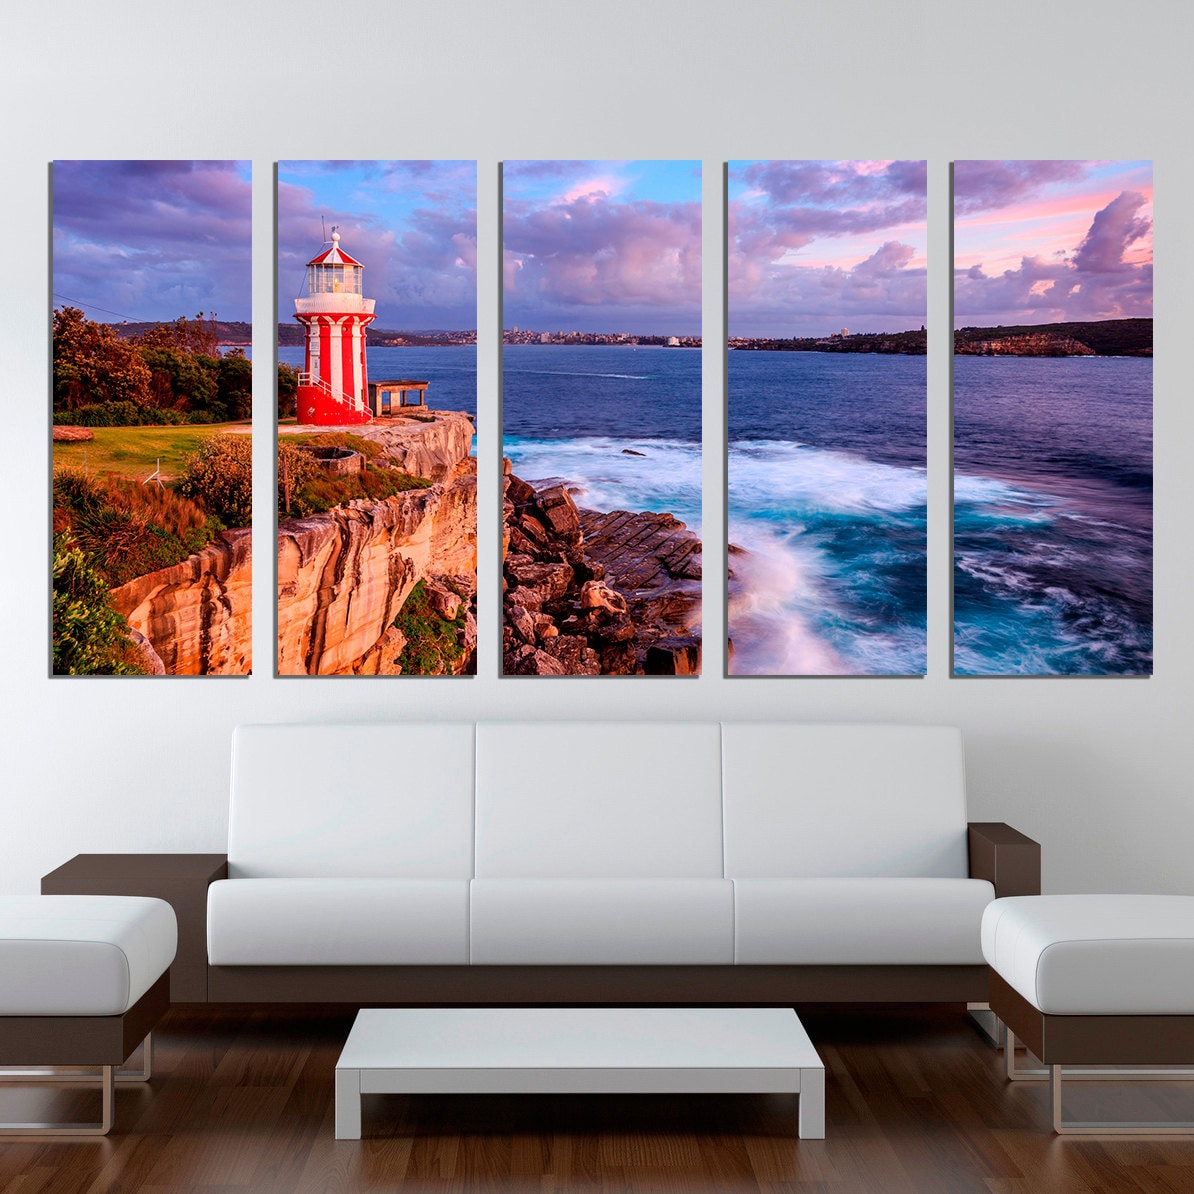 Ocean canvas print / Nature Lighthouse Ocean Extra Large Wall